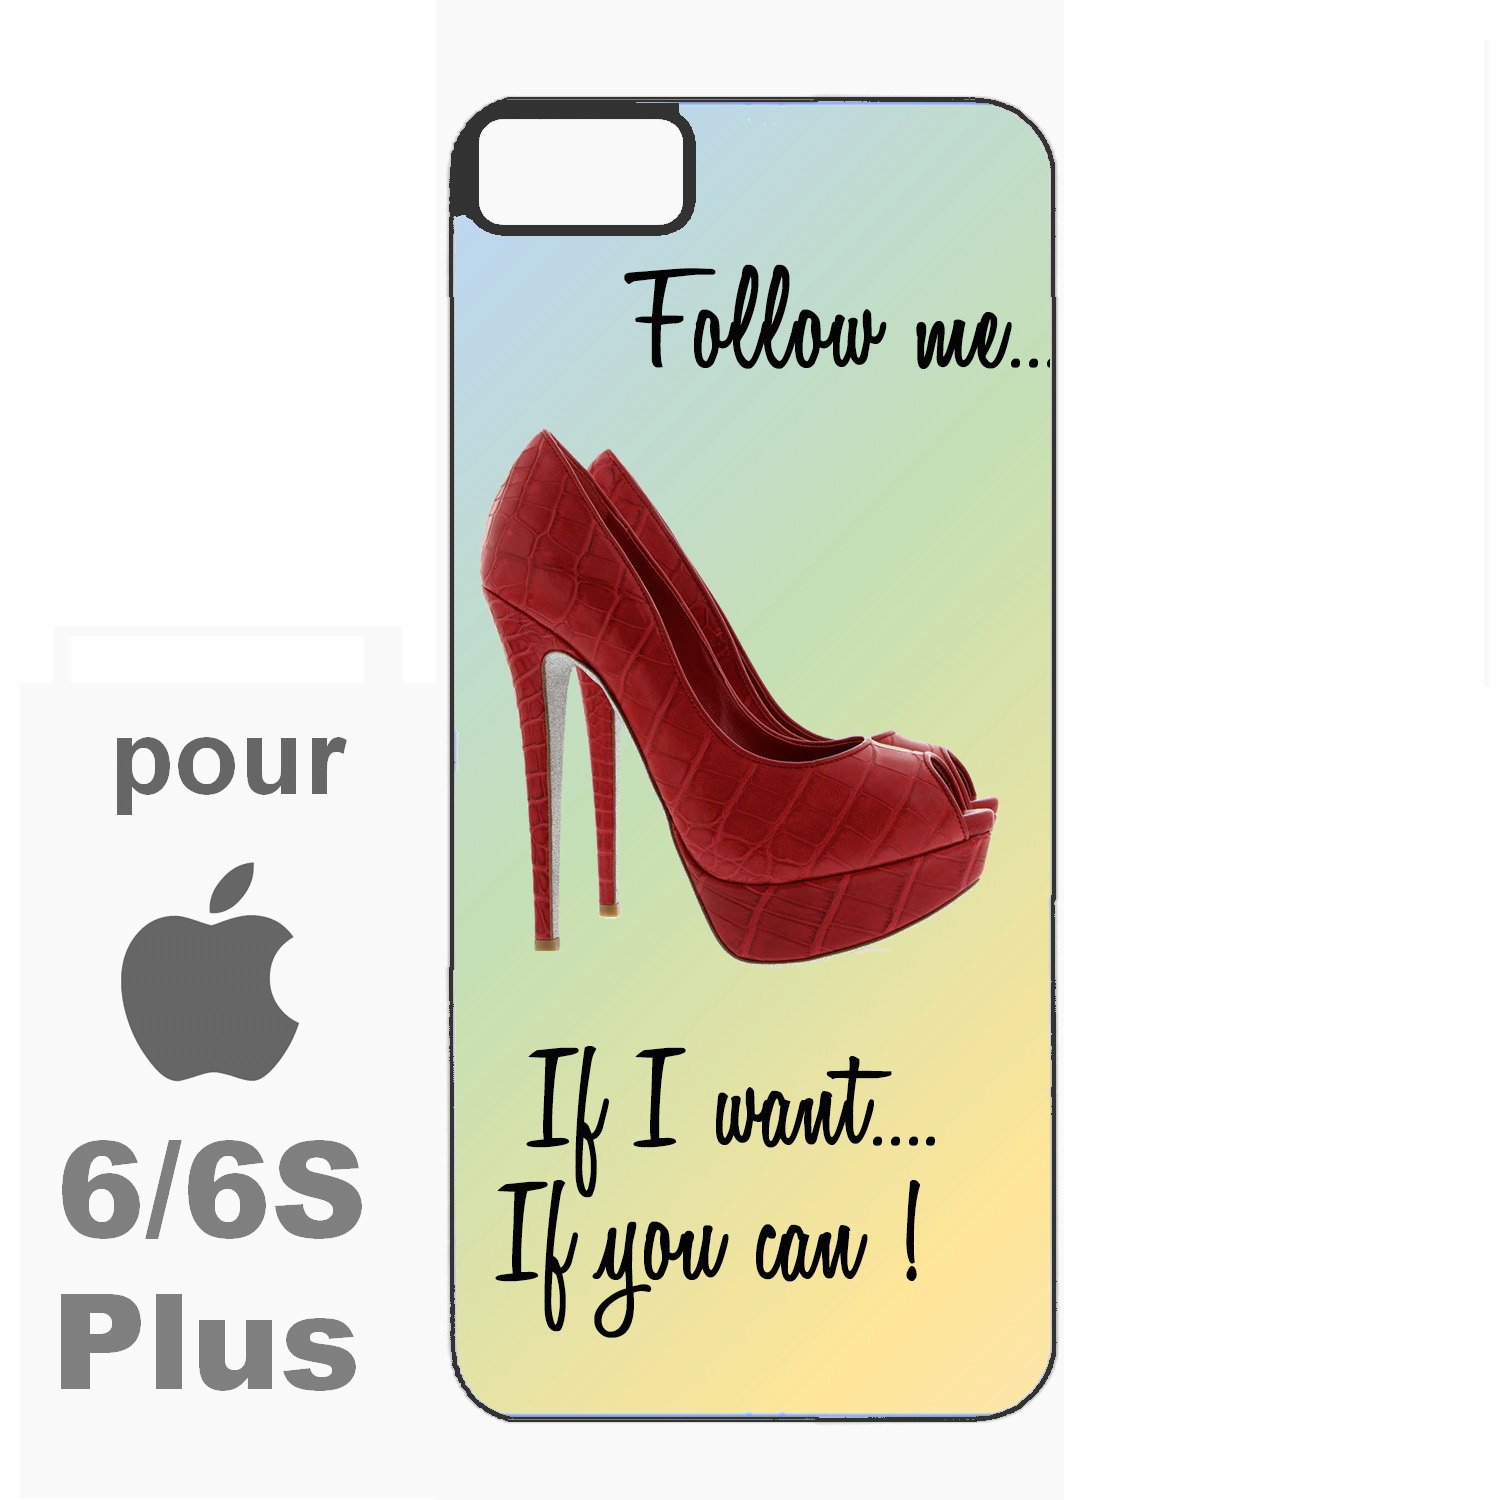 coque iphone 6 shoes